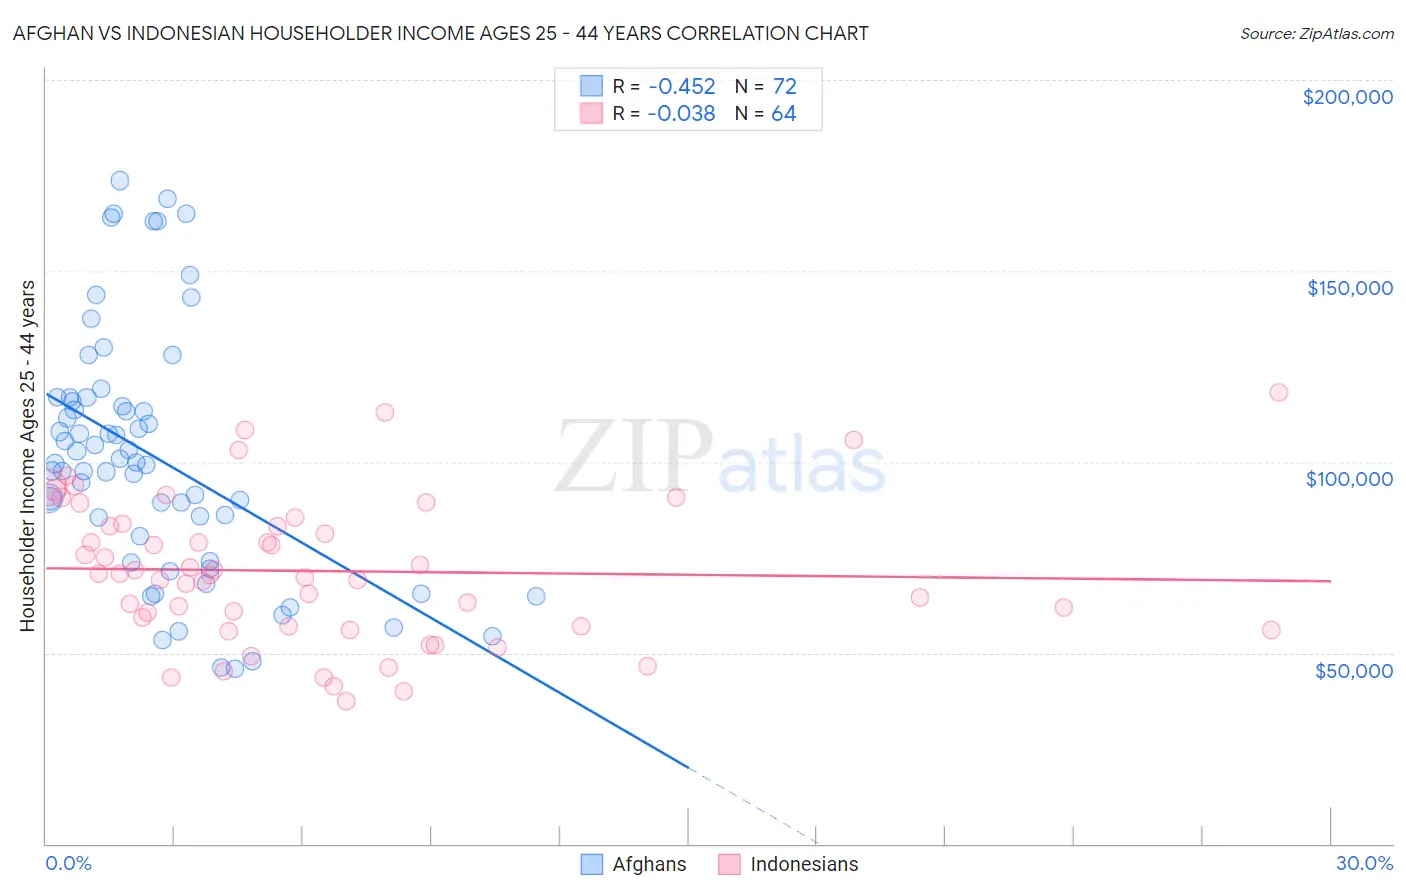 Afghan vs Indonesian Householder Income Ages 25 - 44 years